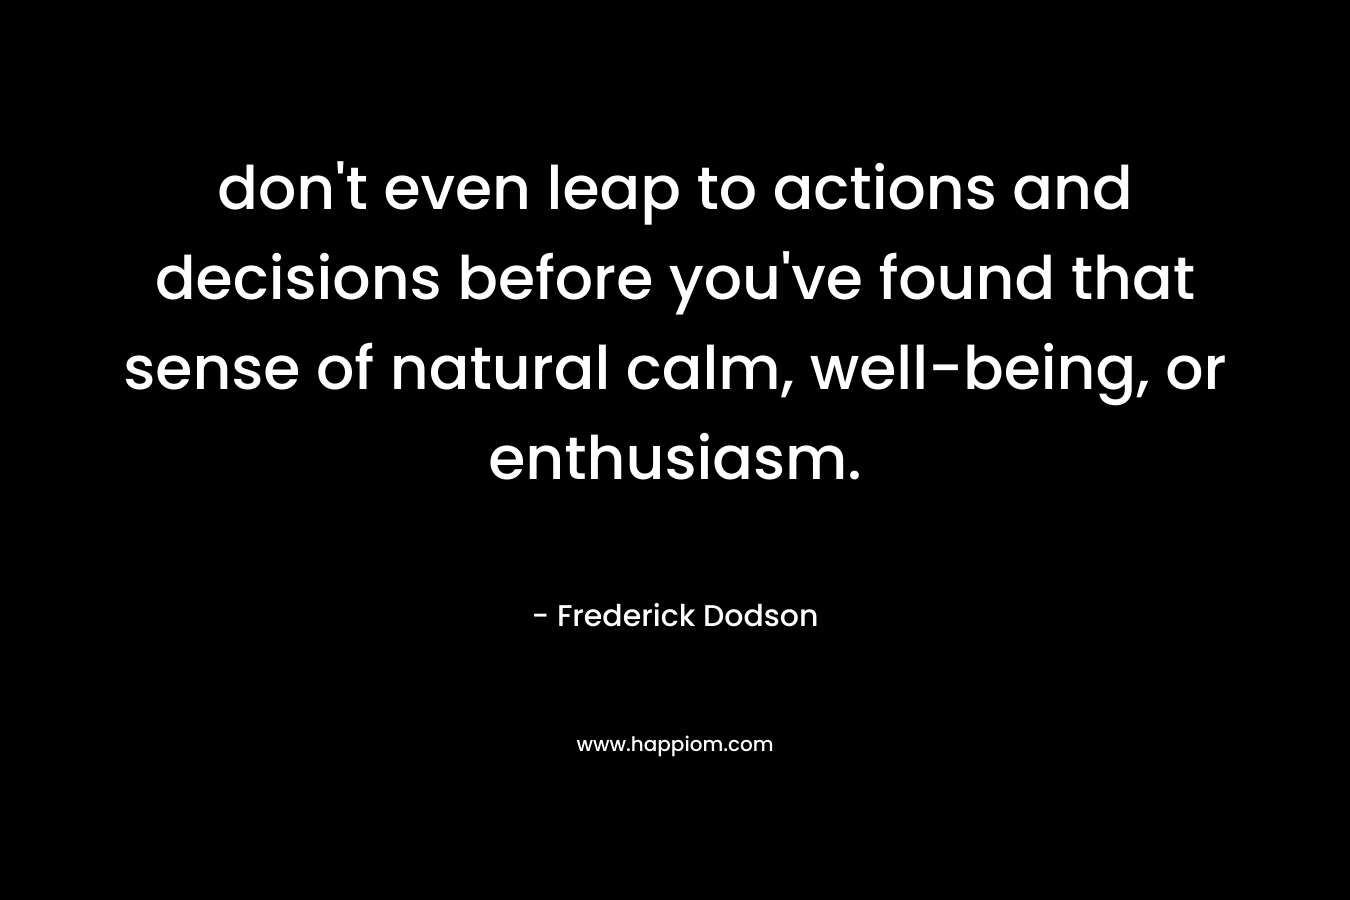 don’t even leap to actions and decisions before you’ve found that sense of natural calm, well-being, or enthusiasm. – Frederick Dodson